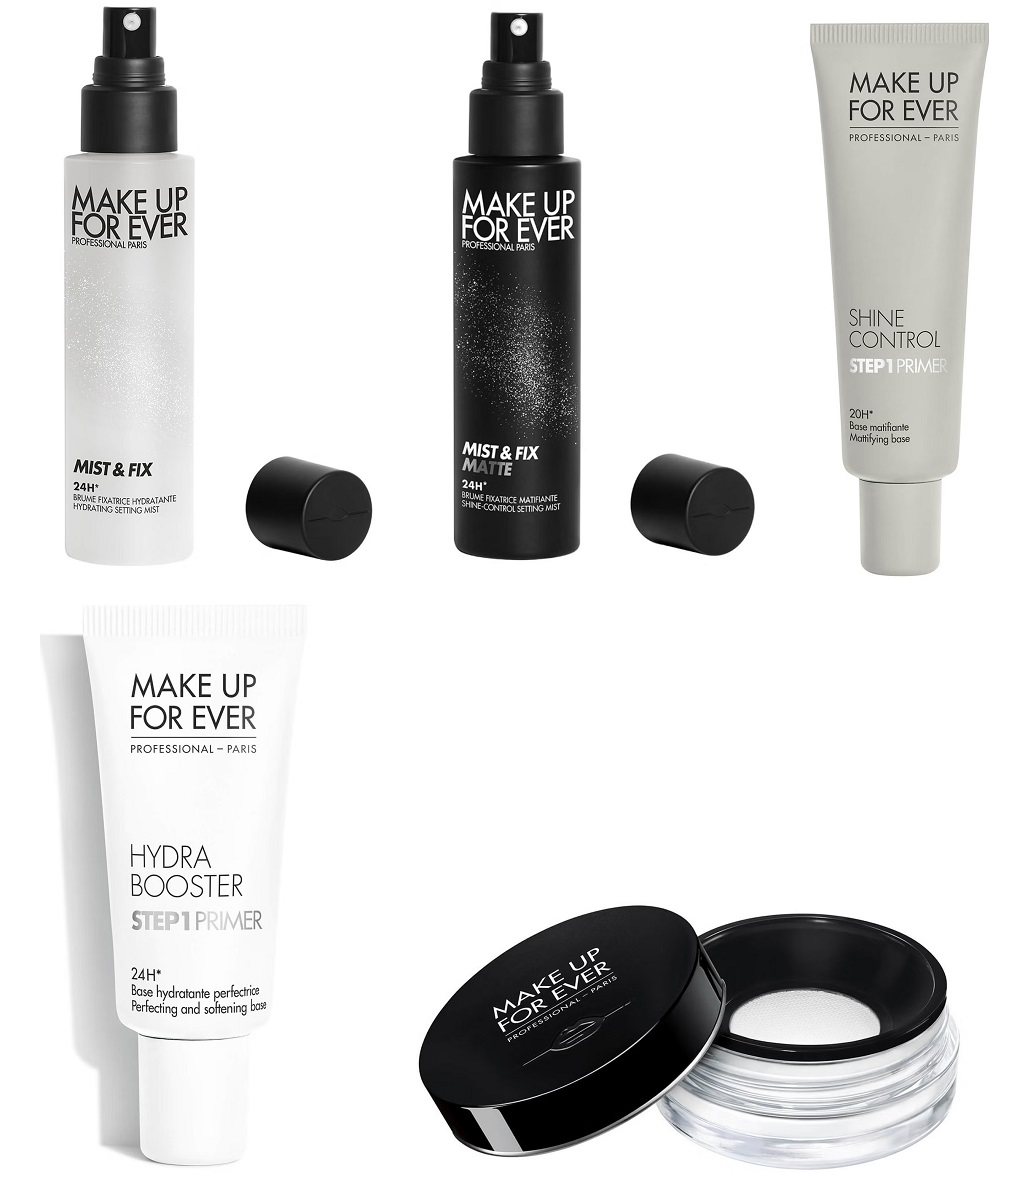 New launches from MAKE UP FOR EVER at Lookfantastic